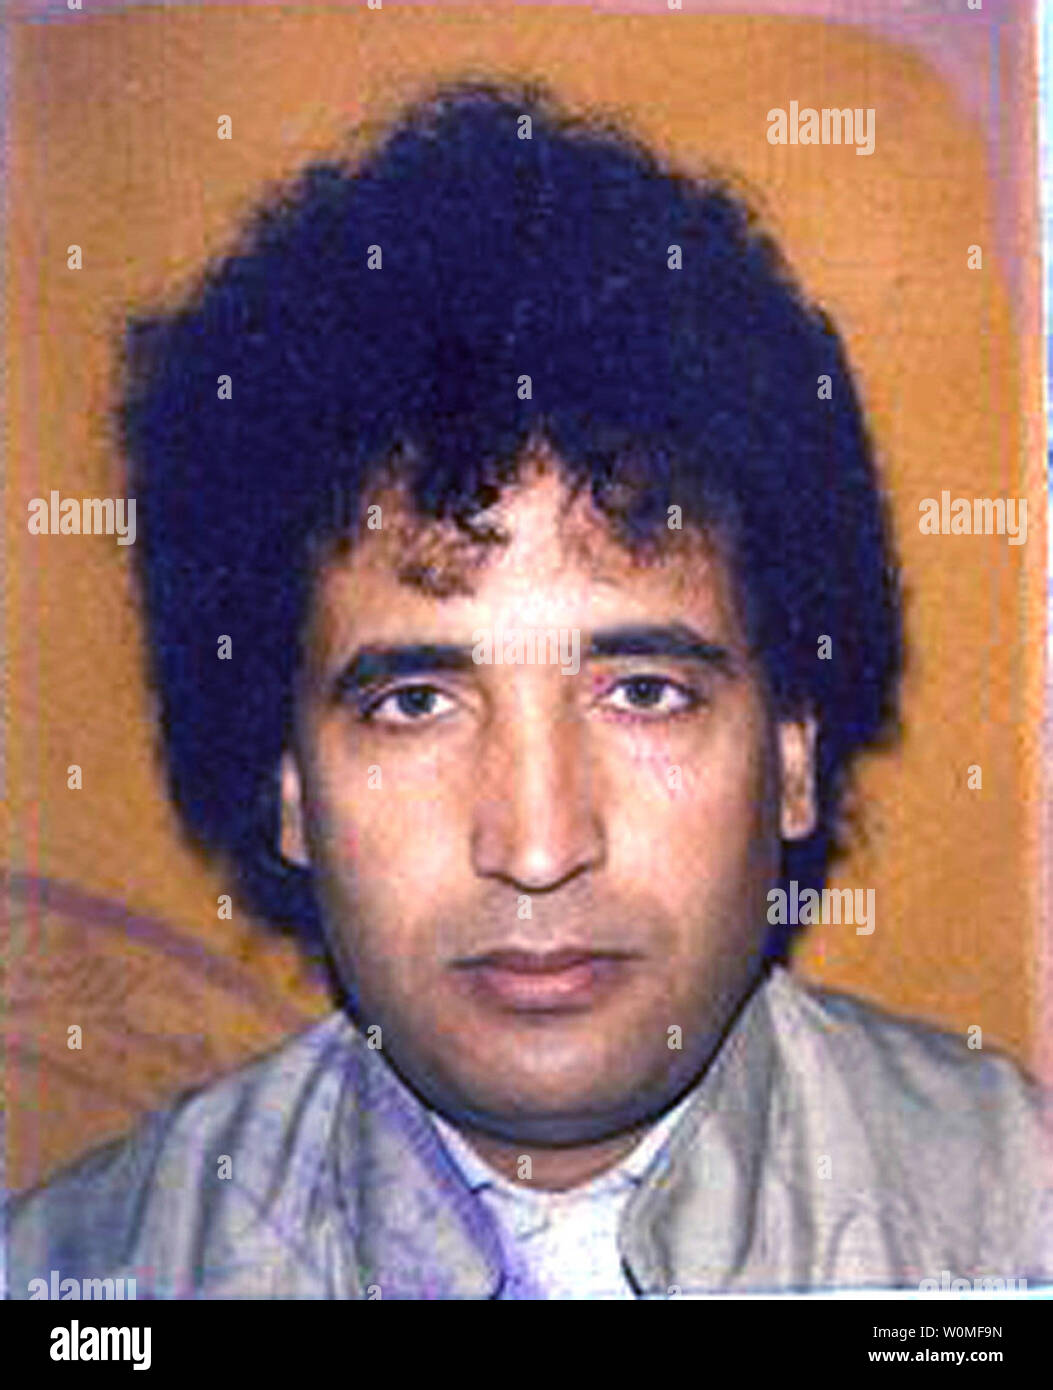 In a photo released by the Crown Office, Lockerbie bomber Abdel Basset al-Megrahi, the Libyan man who was convicted of the deadly 1988 bombing of Pan Am Flight 103,  is shown in his passport picture on August 20, 2009.  Al-Megrahi, diagnosed with terminal cancer, was released today by Scottish officials on compassionate grounds and returned to Libya.   UPI/Crown Office Stock Photo